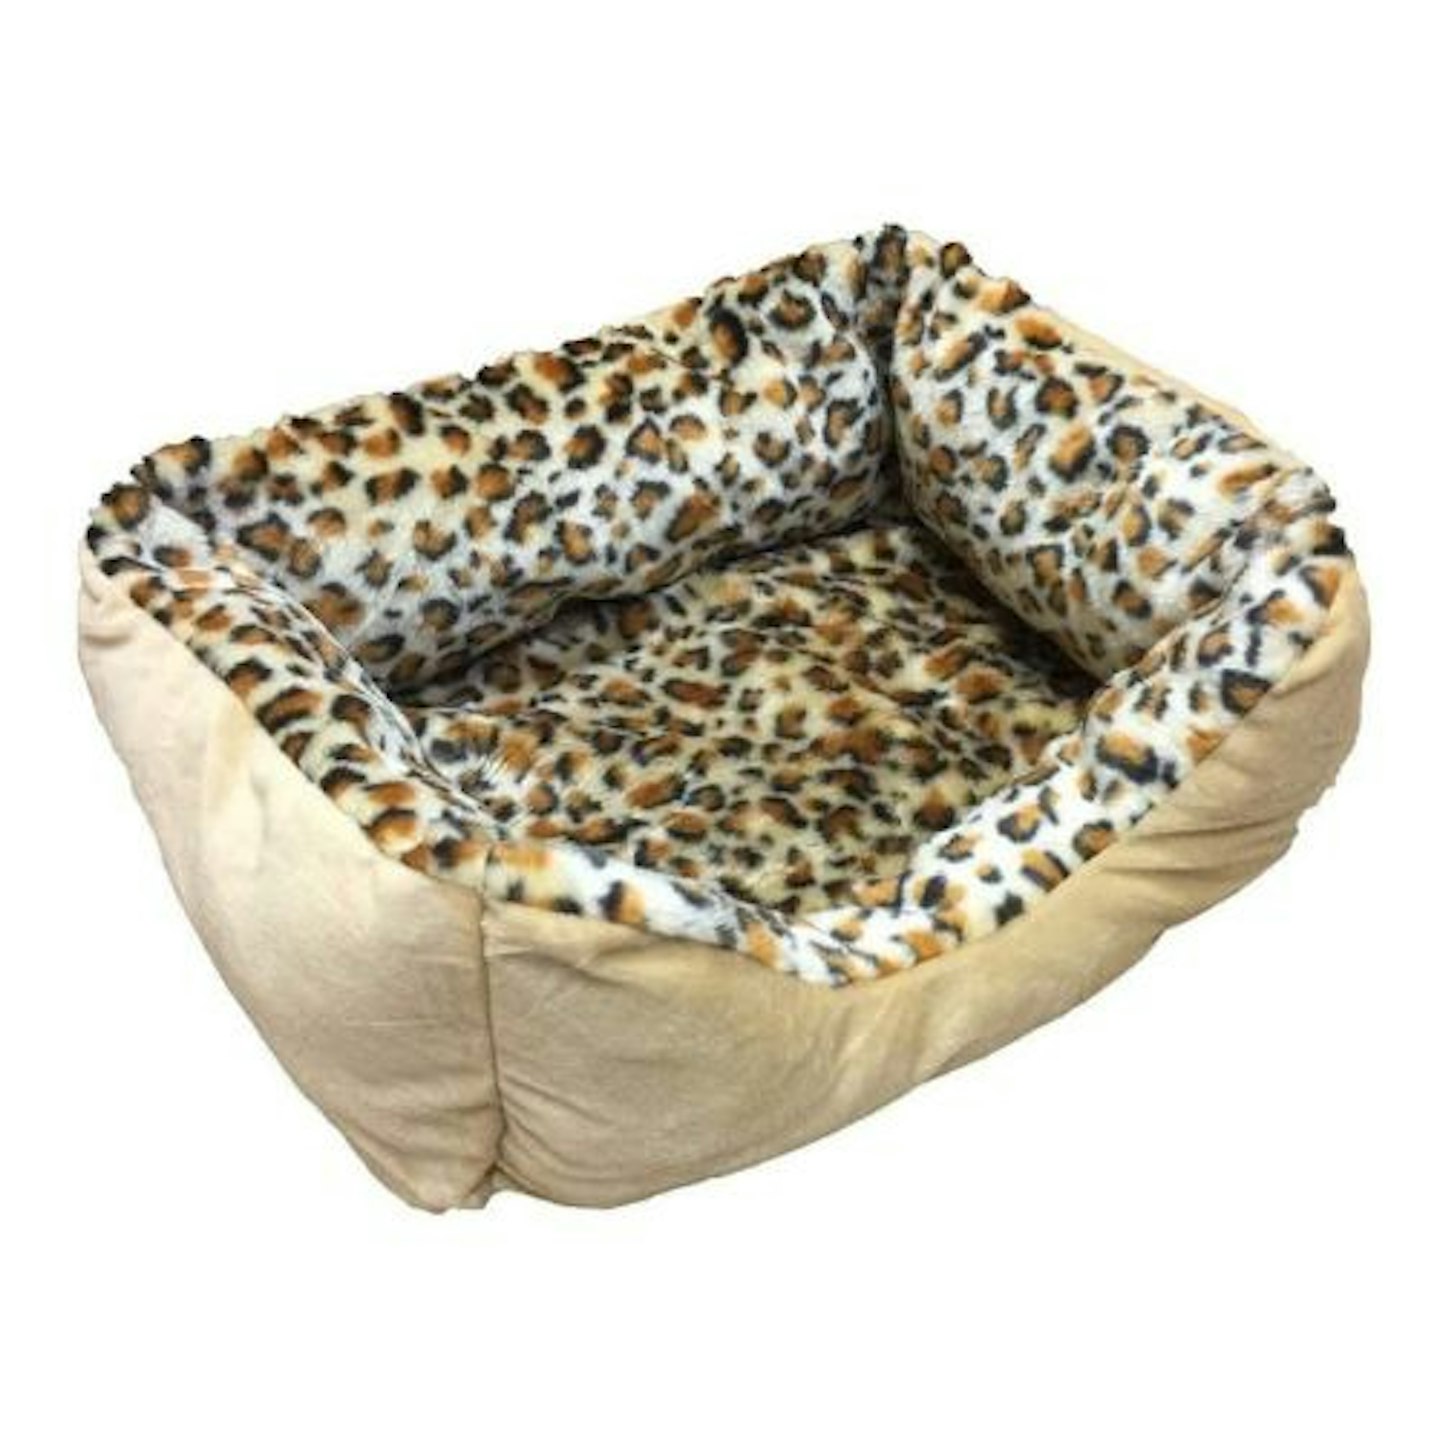 Petnap Heated Cat Bed with Leopard Print Design